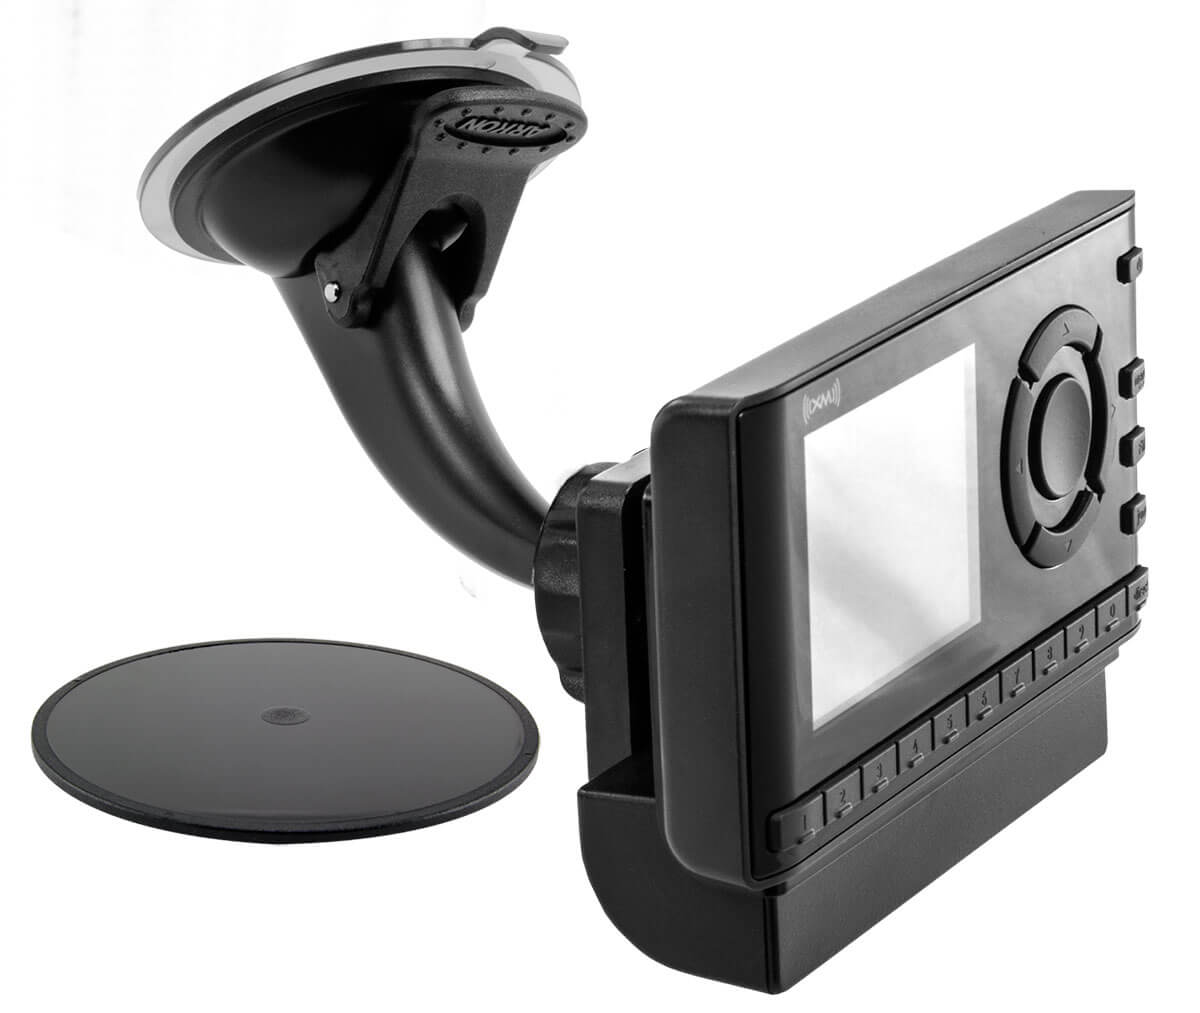 SR115 Suction cup mount shown with SiriusXM™ mounted